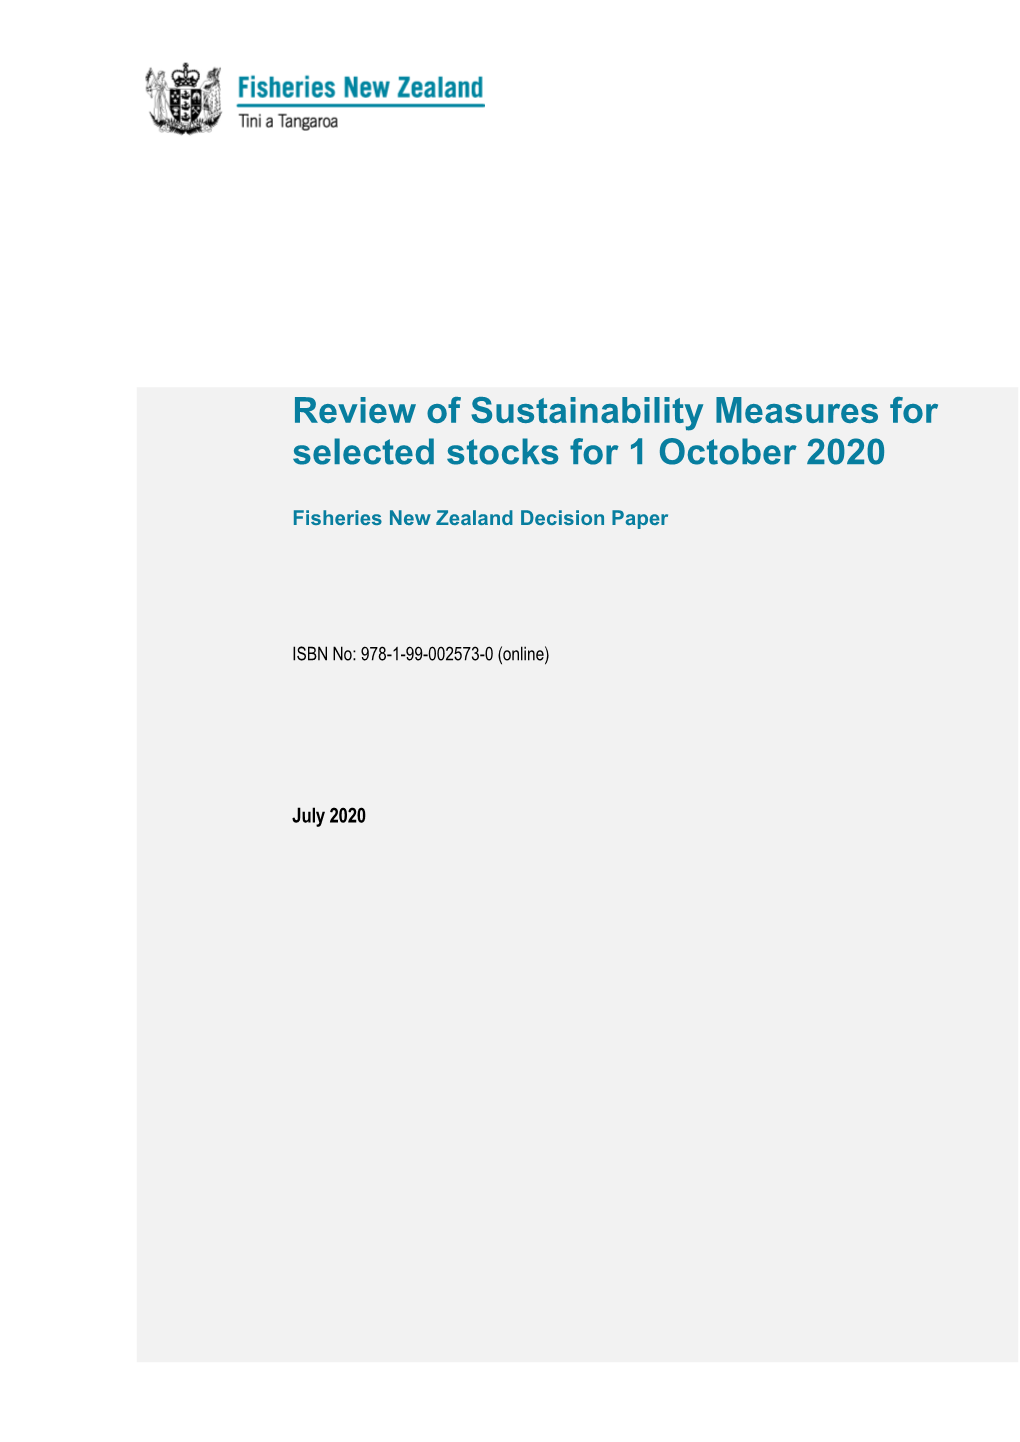 Review of Sustainability Measures for Selected Stocks for 1 October 2020